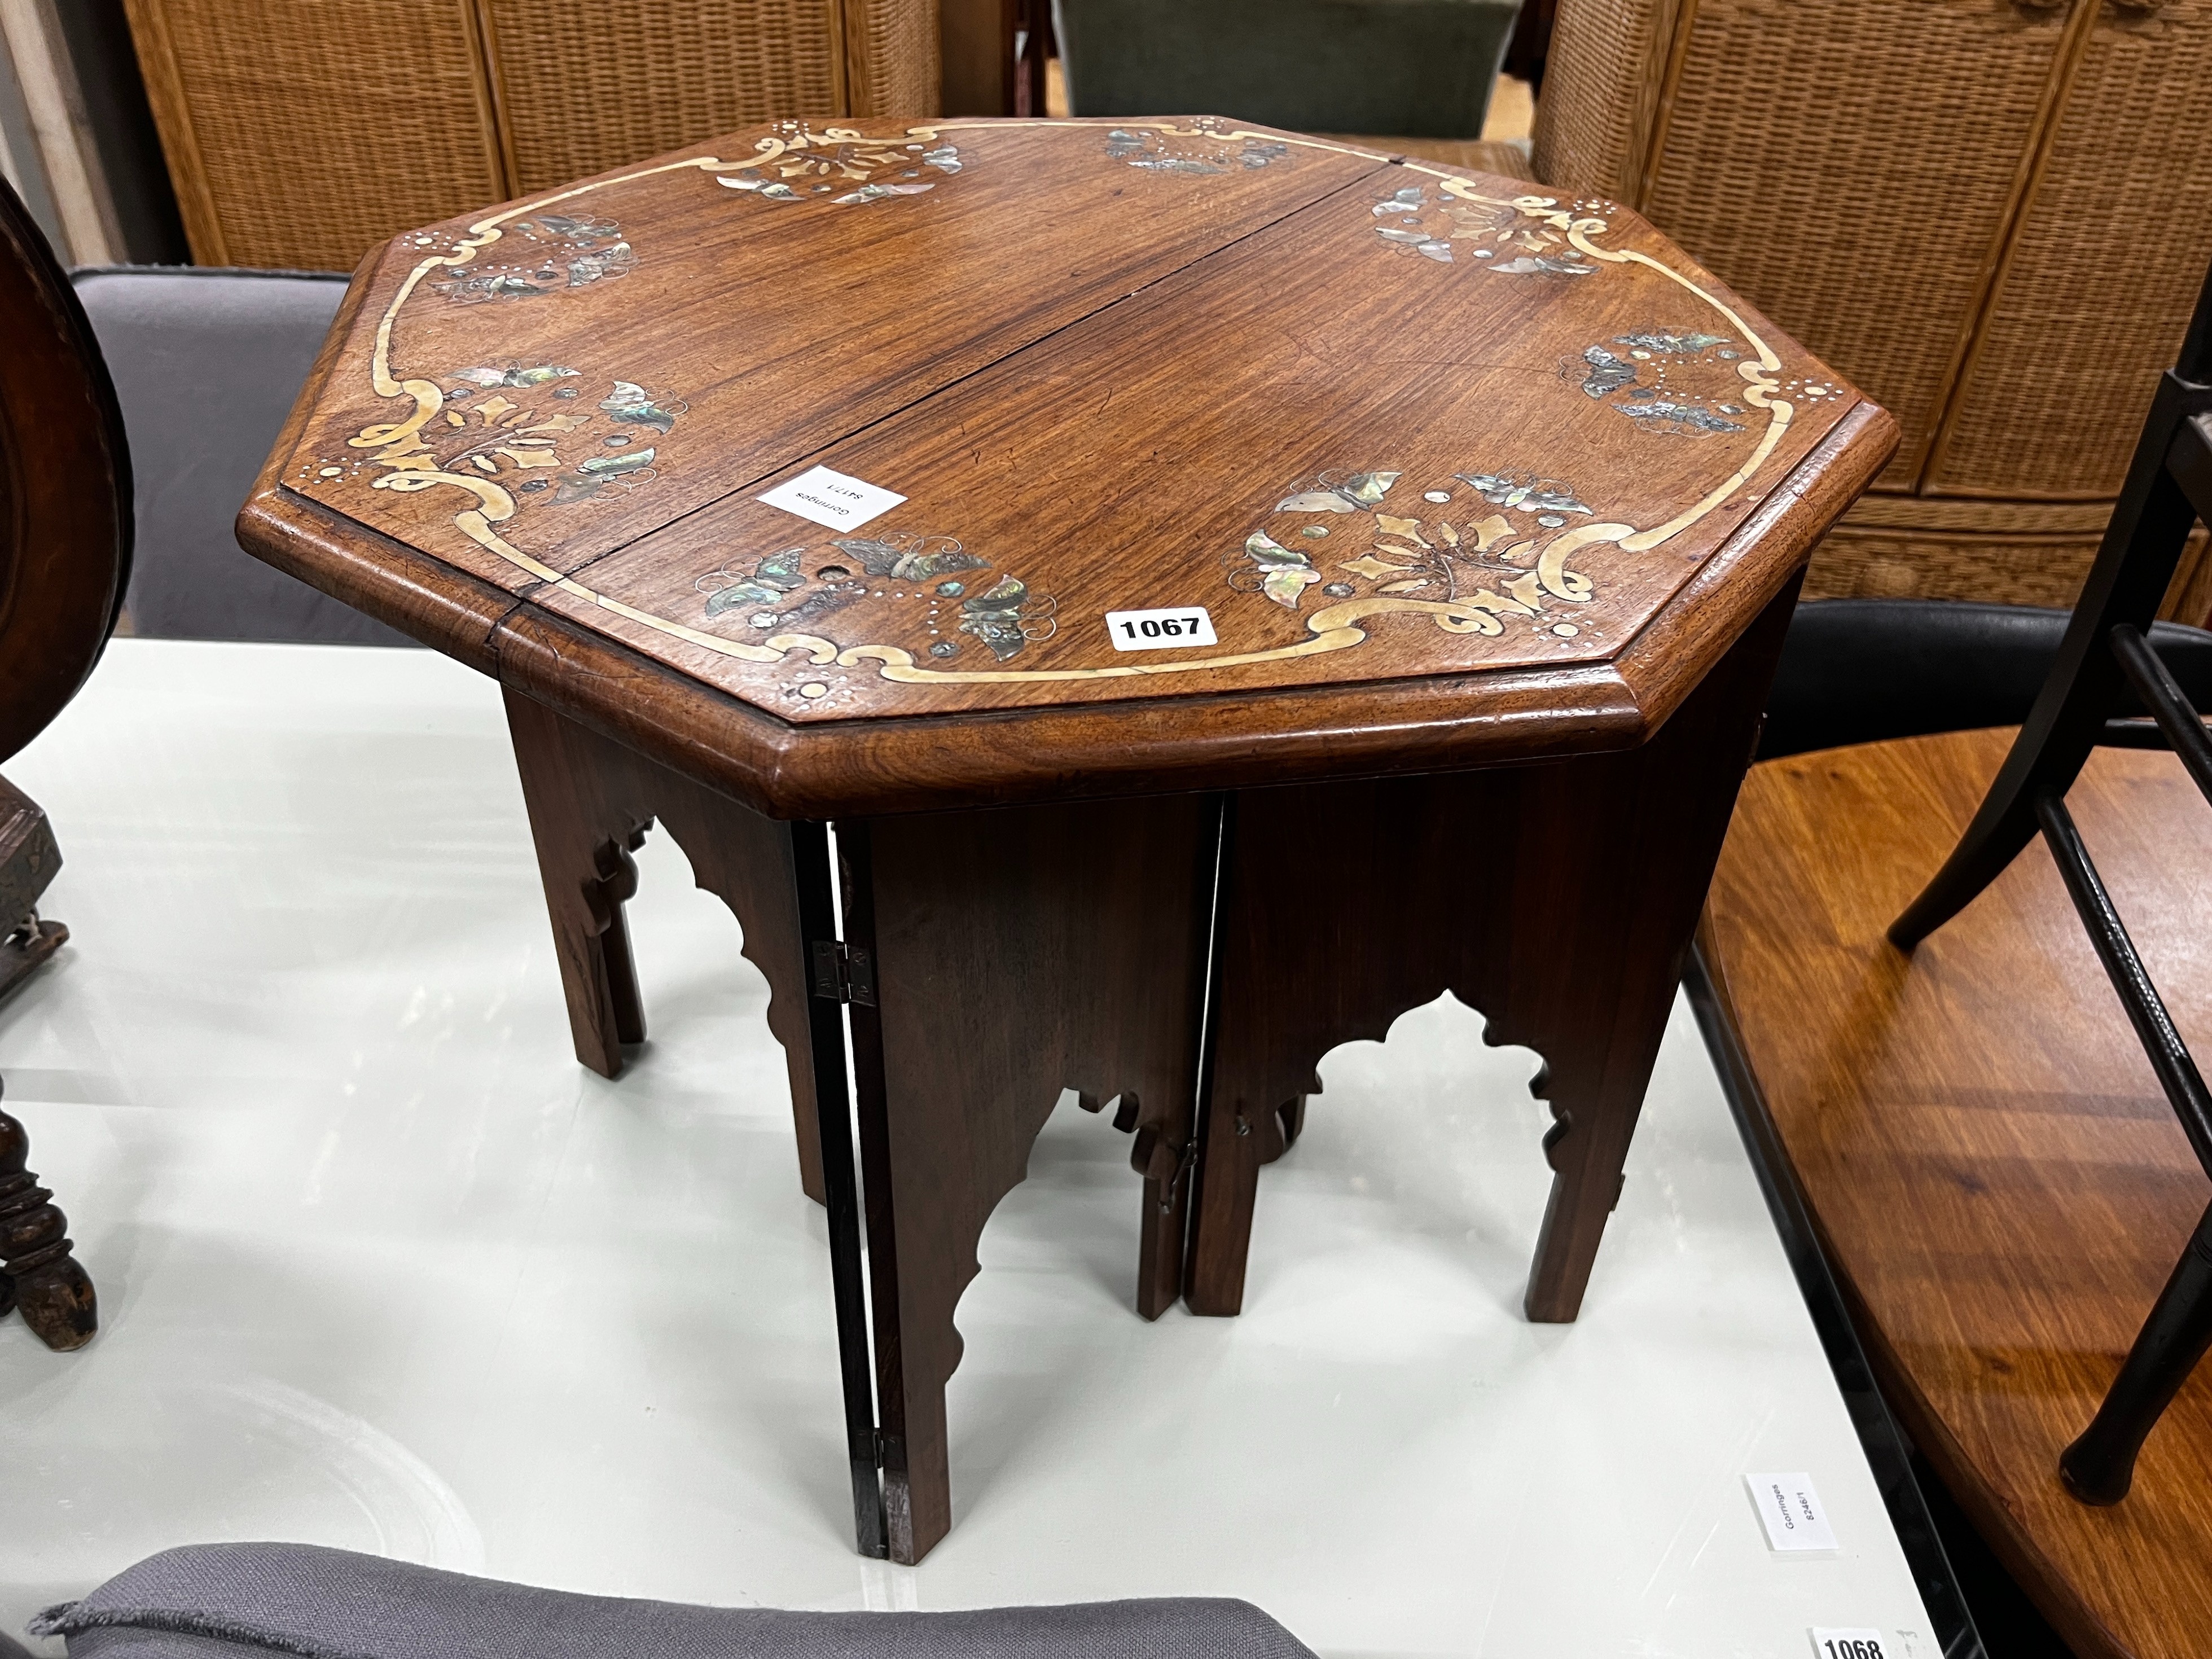 An Indian “Mysore Arts & Crafts” Abalone inlaid octagonal hardwood Moorish style table with folding stand, width 60cm, height 50cm